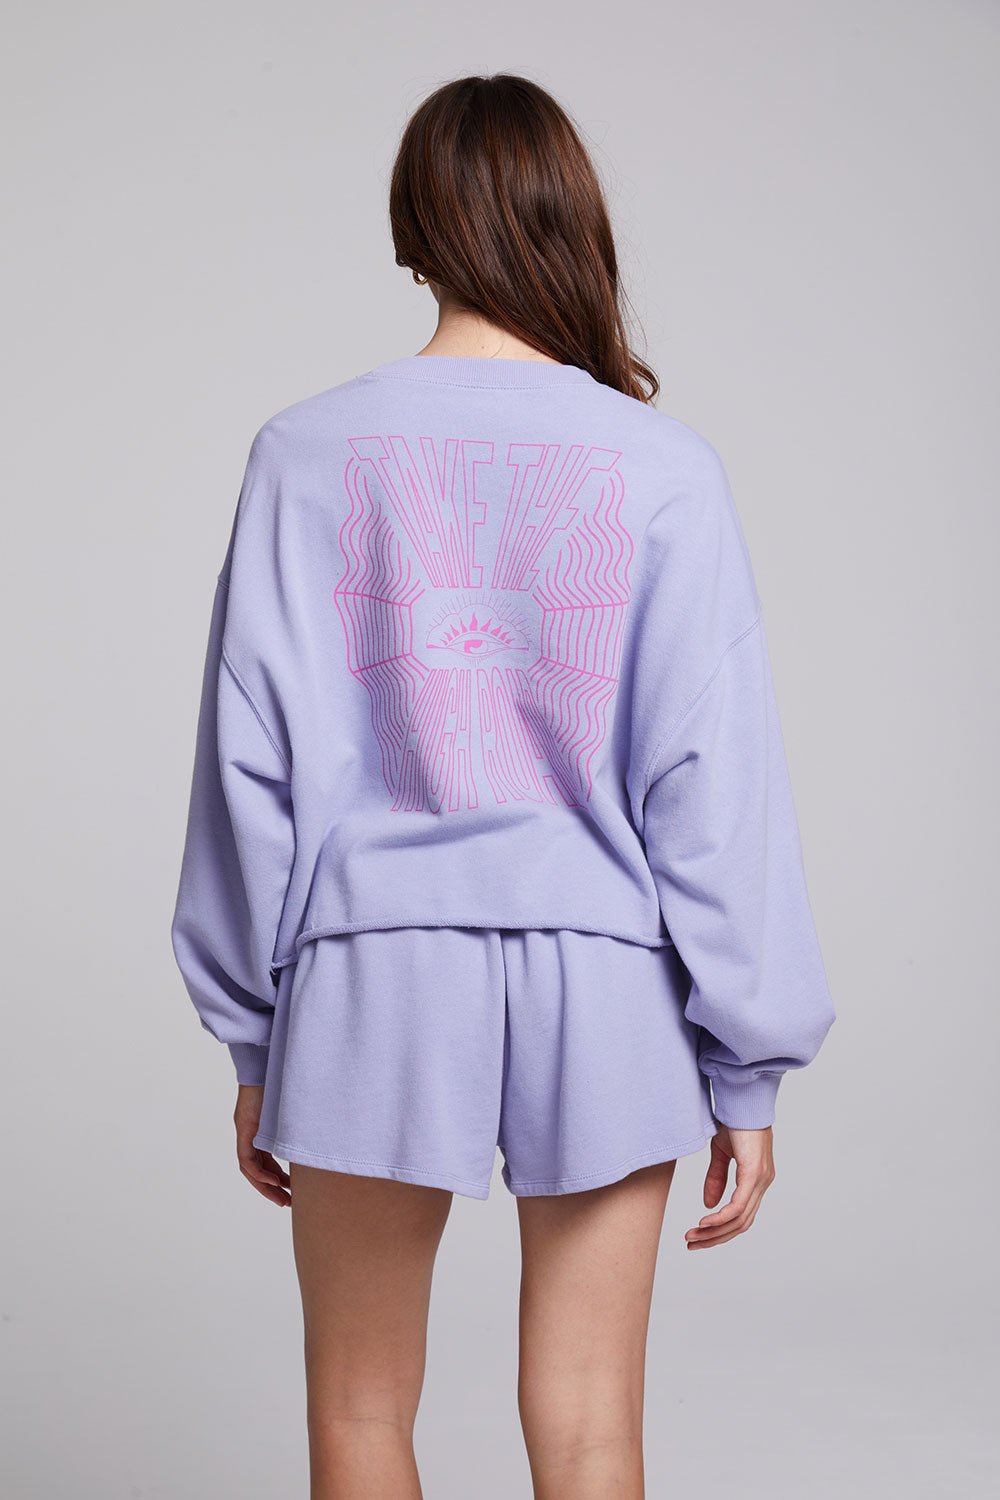 High Road Zodiac Pullover - Chaser Brand